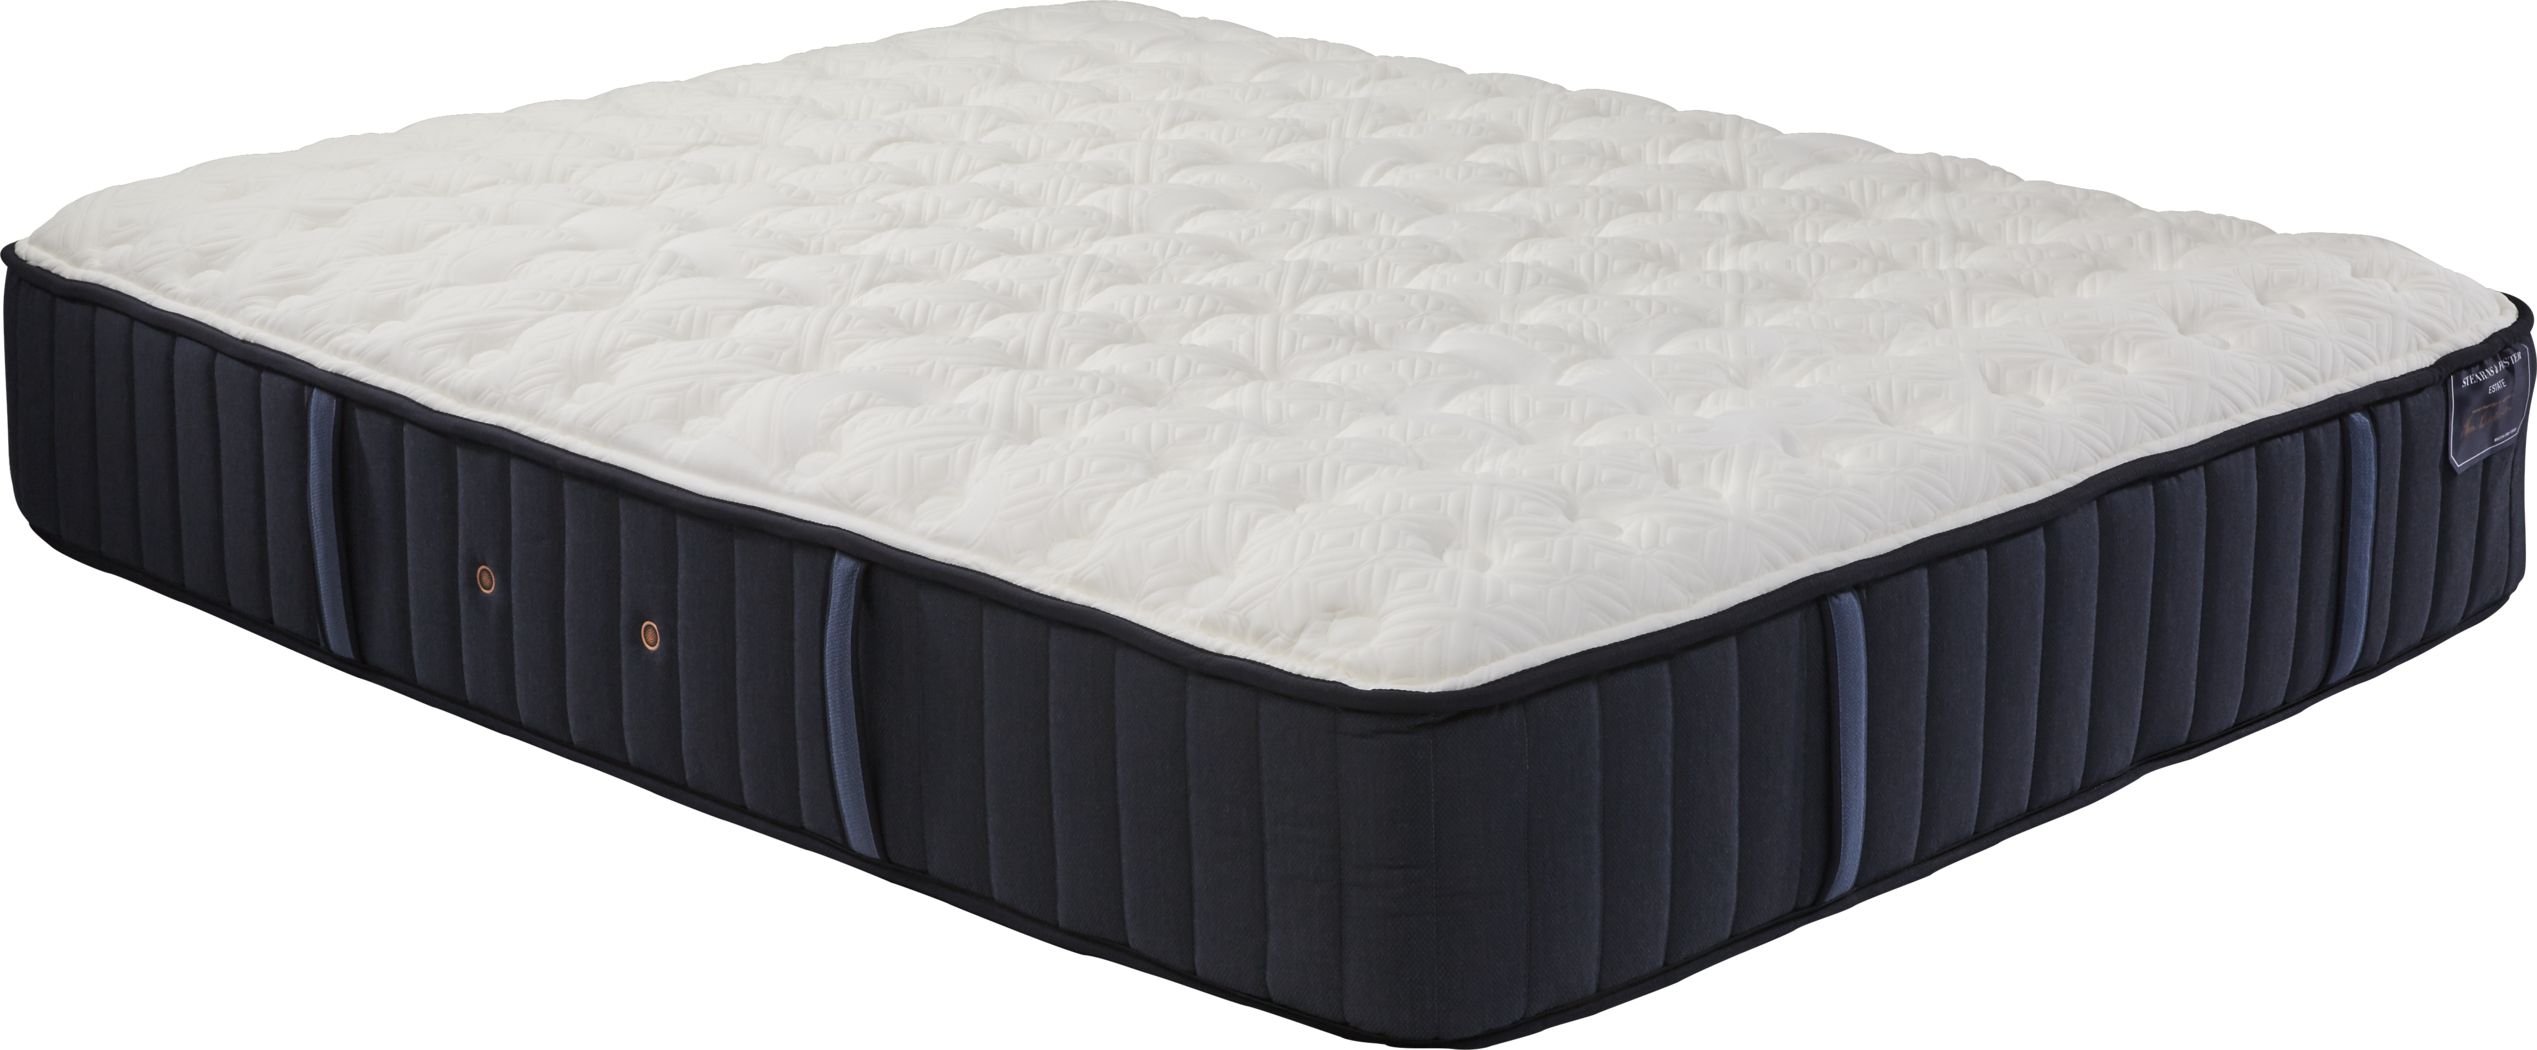 king stearns and foster mattress prices